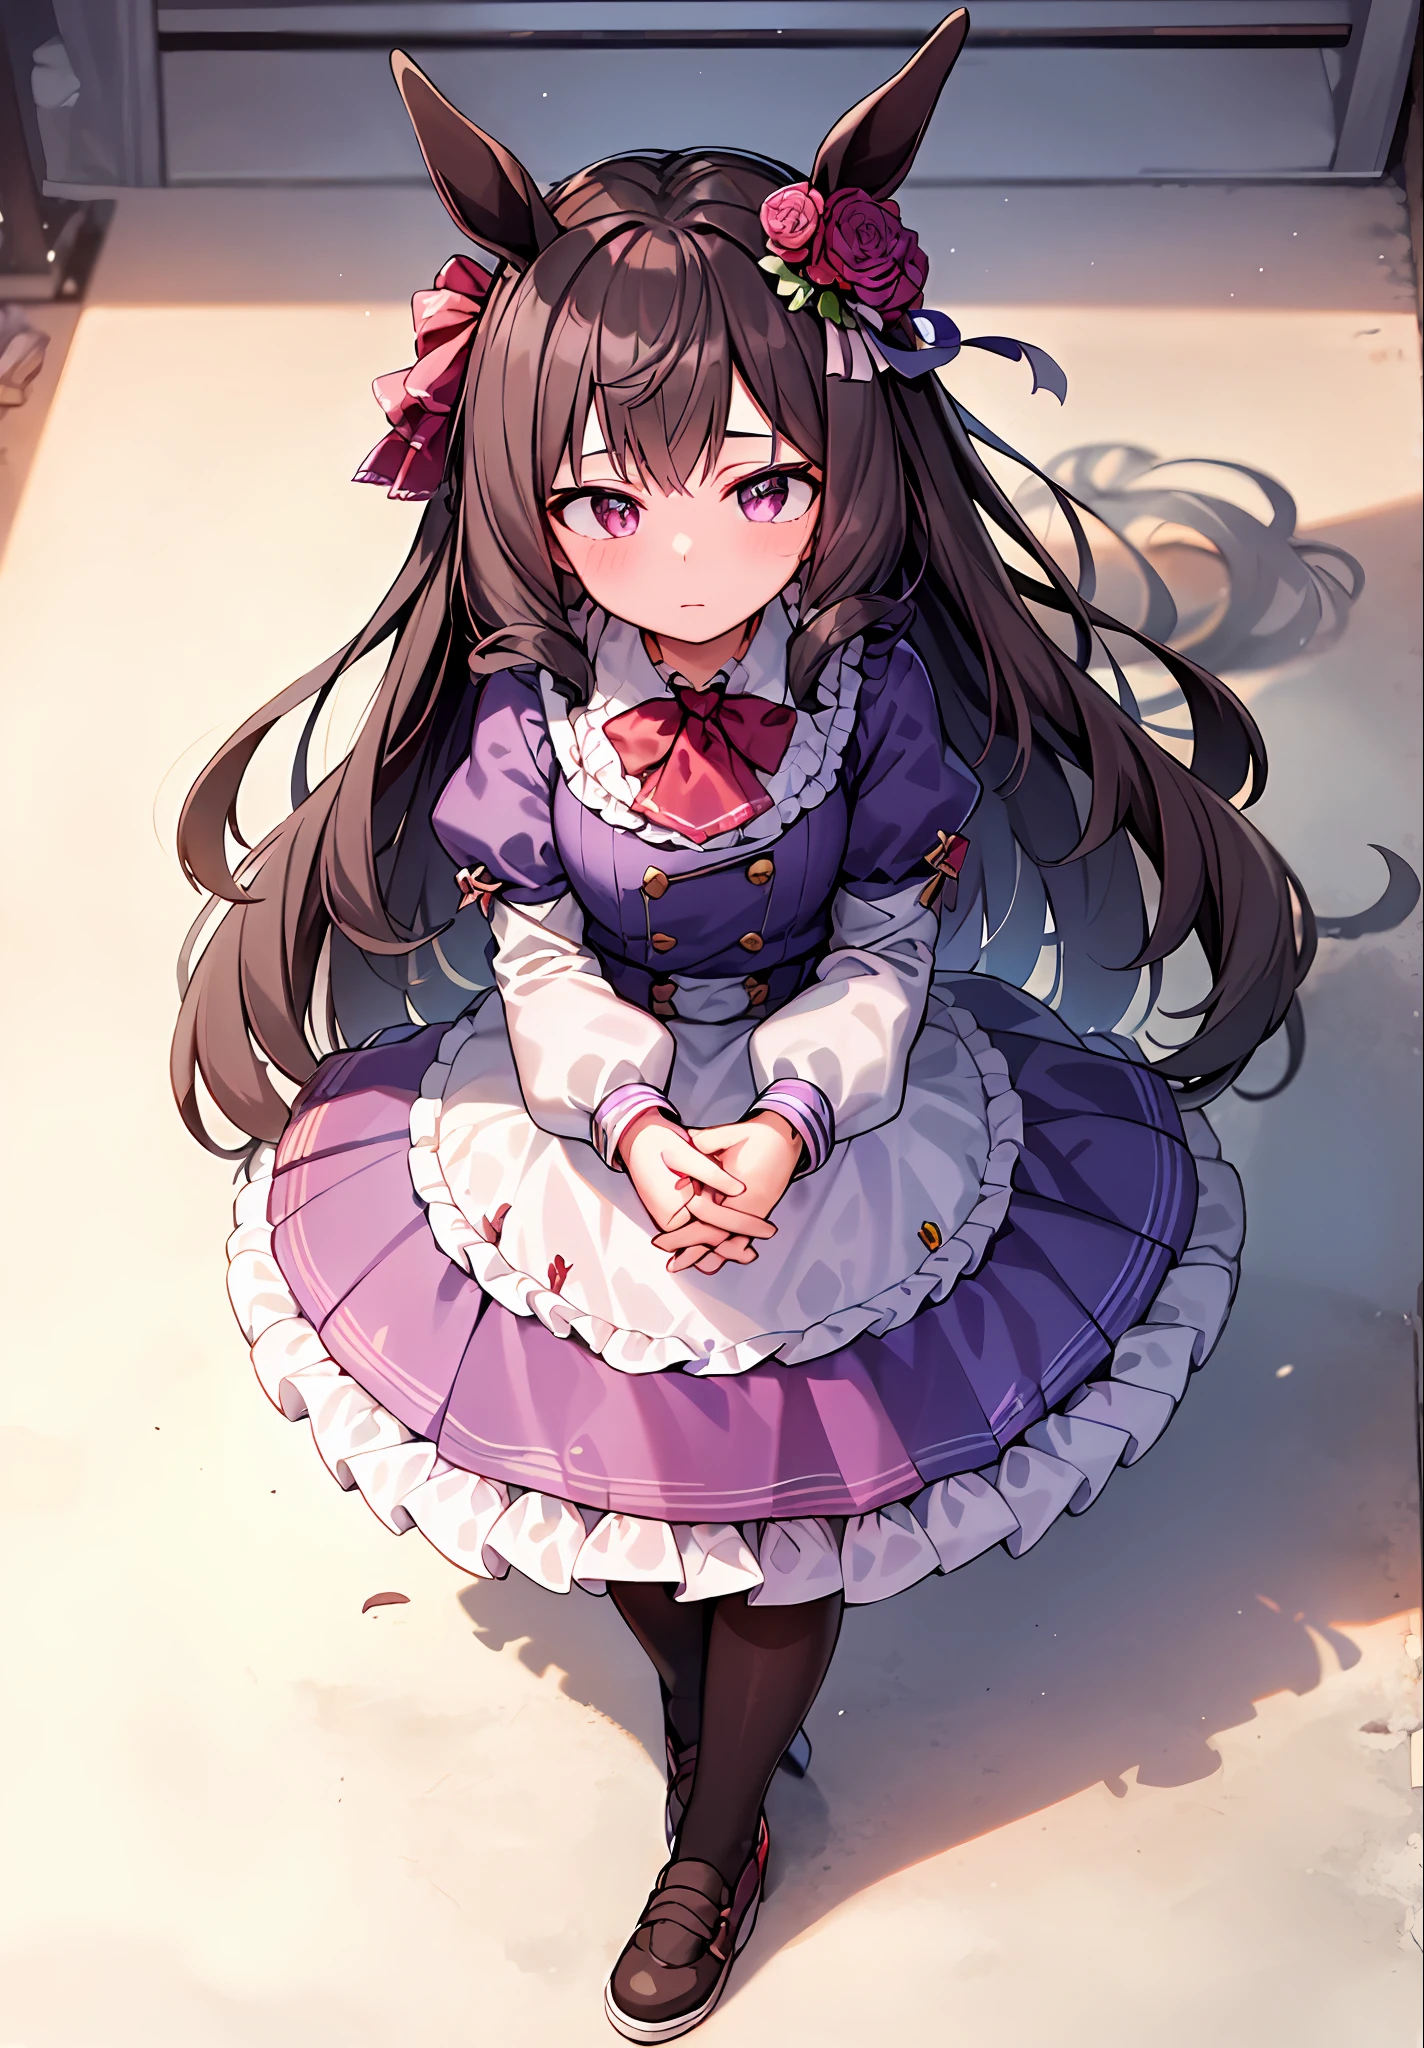 ((masterpiece, highest quality)),
, 1st ruby, horse ears, (purple_dress,purple_skirt), long_skirt, flowers, ruffles, hair flowers, interlocking fingers, long sleeves, putting their hands together, puffy sleeves, red flowers, solo, white pantyhose, white leg clothes, small_breasts,
 Look at the viewer, ((looking at it from slightly above)), (quiet expression), standing, doll girl, spherical joint